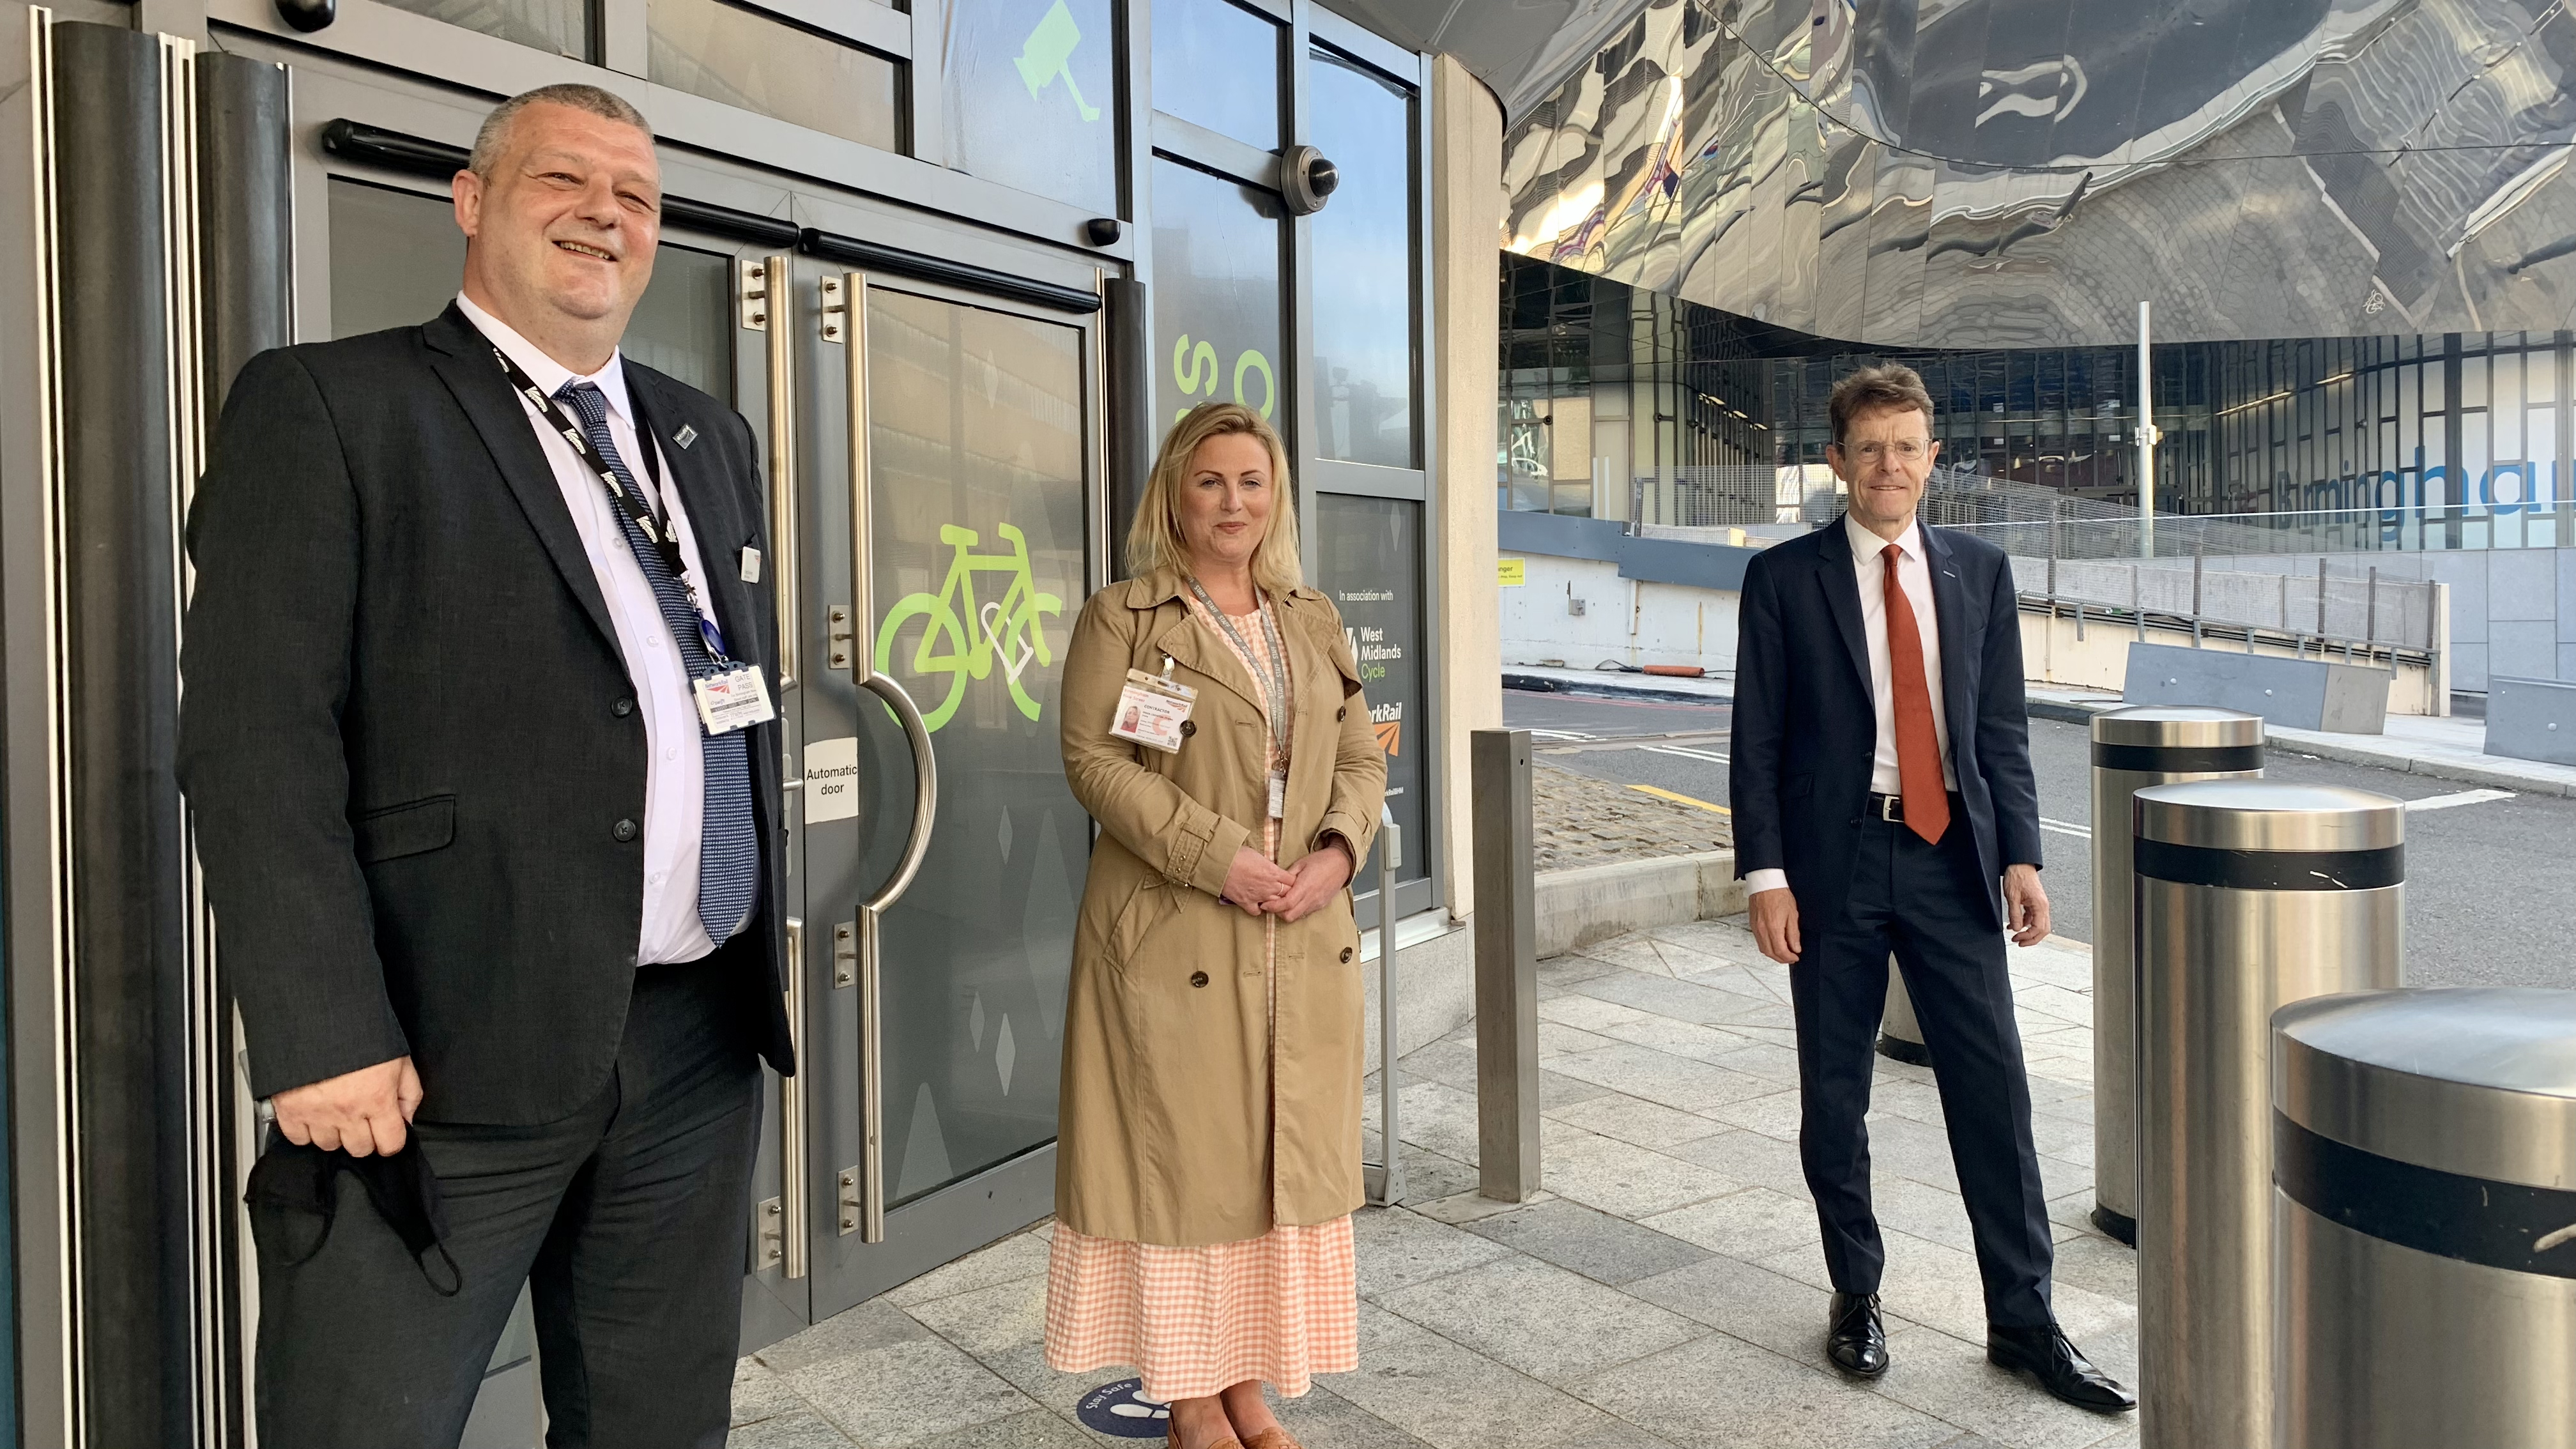 From left: Craig Stenning Birmingham New Street station manager, Emma Crowton, Transport for the West Midlands, Andy Street Mayor of the West Midlands